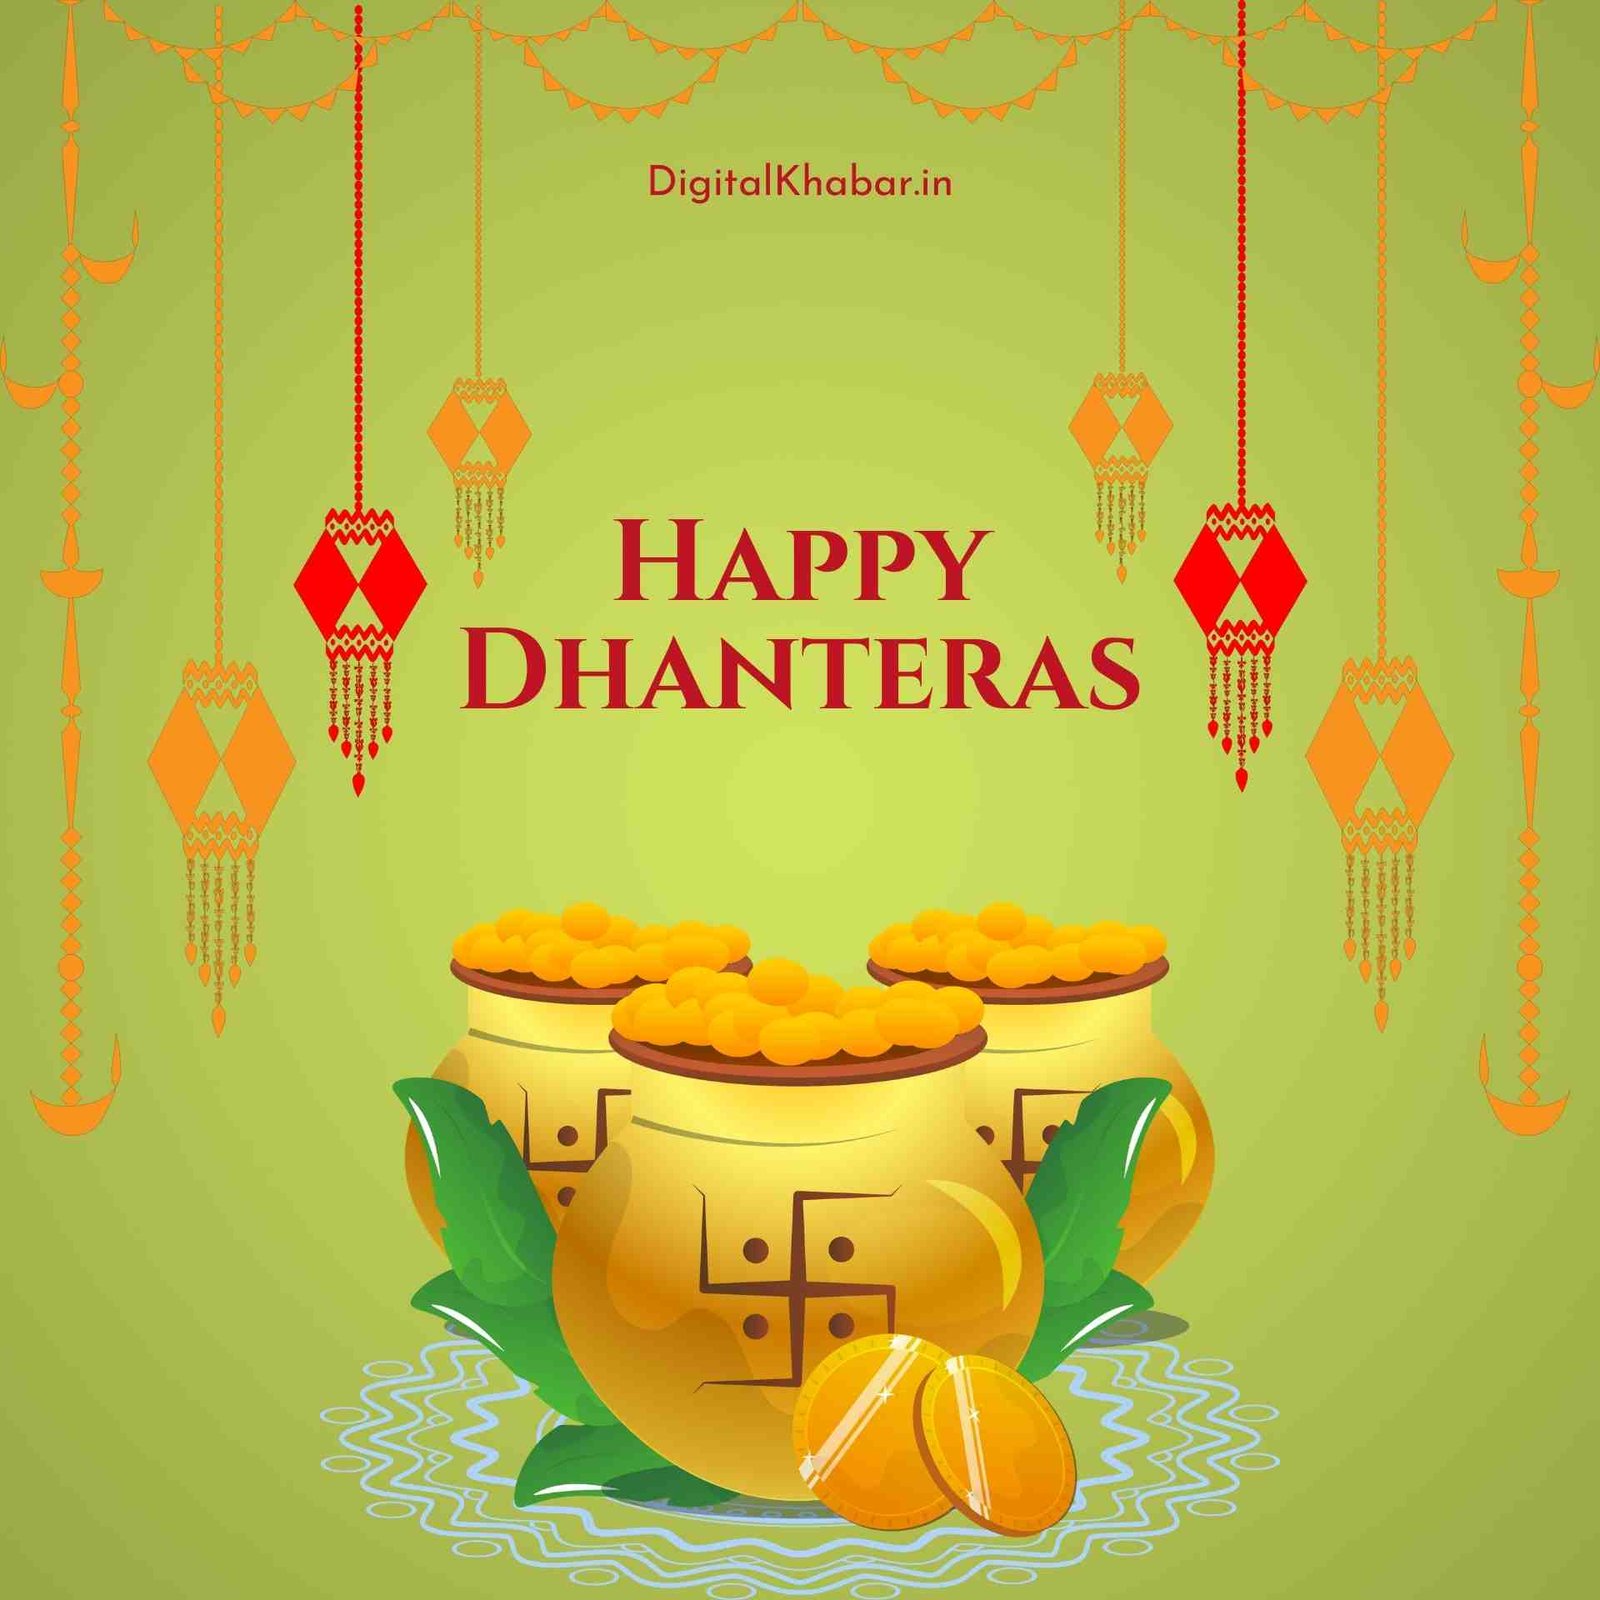 Happy Dhanteras wishes and wishes